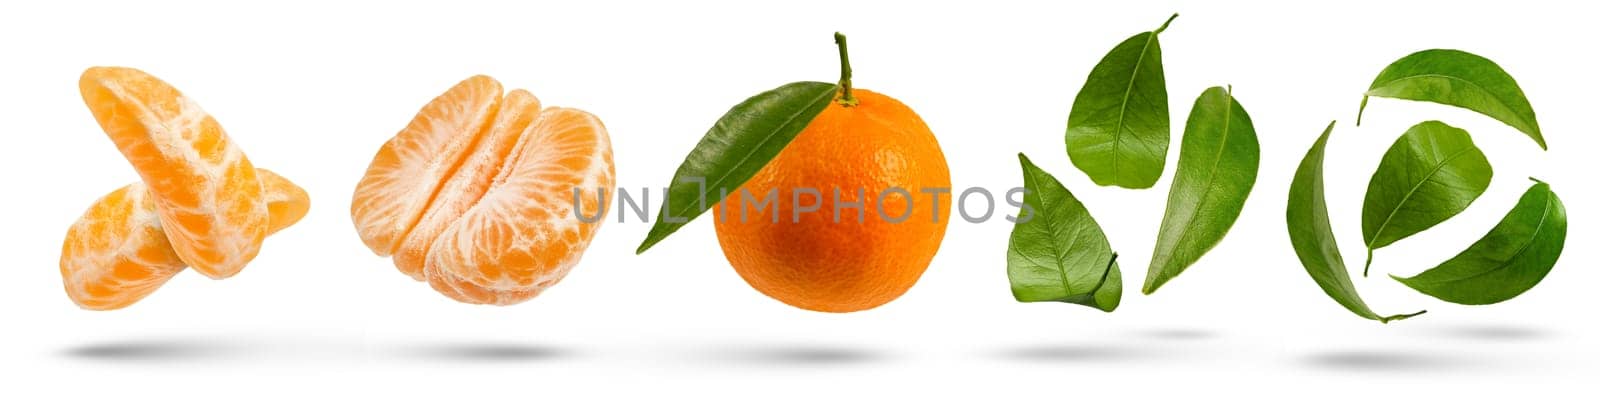 Set of ripe tangerines and their leaves of different cutting methods on a white isolated background. Tangerines cut in different ways hang or fall close-up. High quality photo